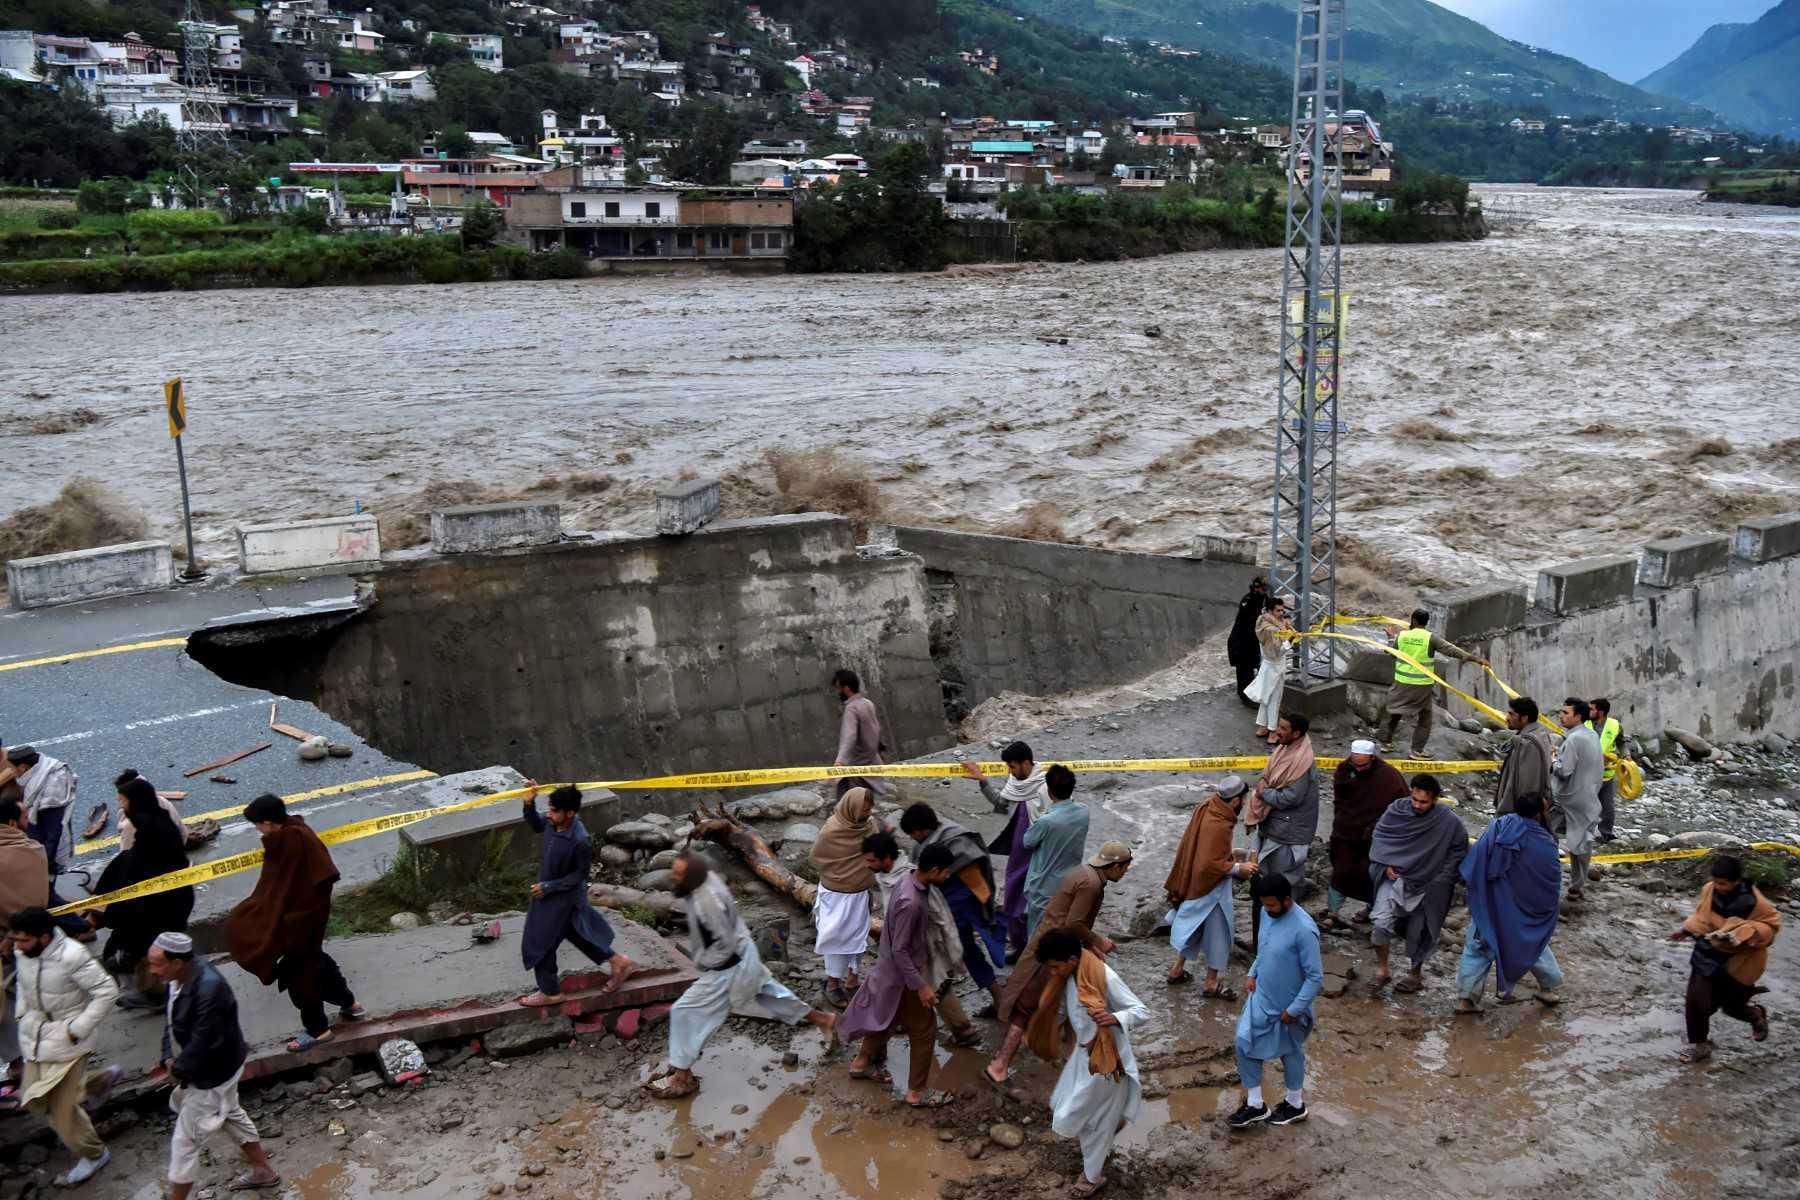 People gather in front of a road damaged by flood waters following heavy monsoon rains in Madian area in Pakistan's northern Swat Valley on Aug 27. Photo: AFP